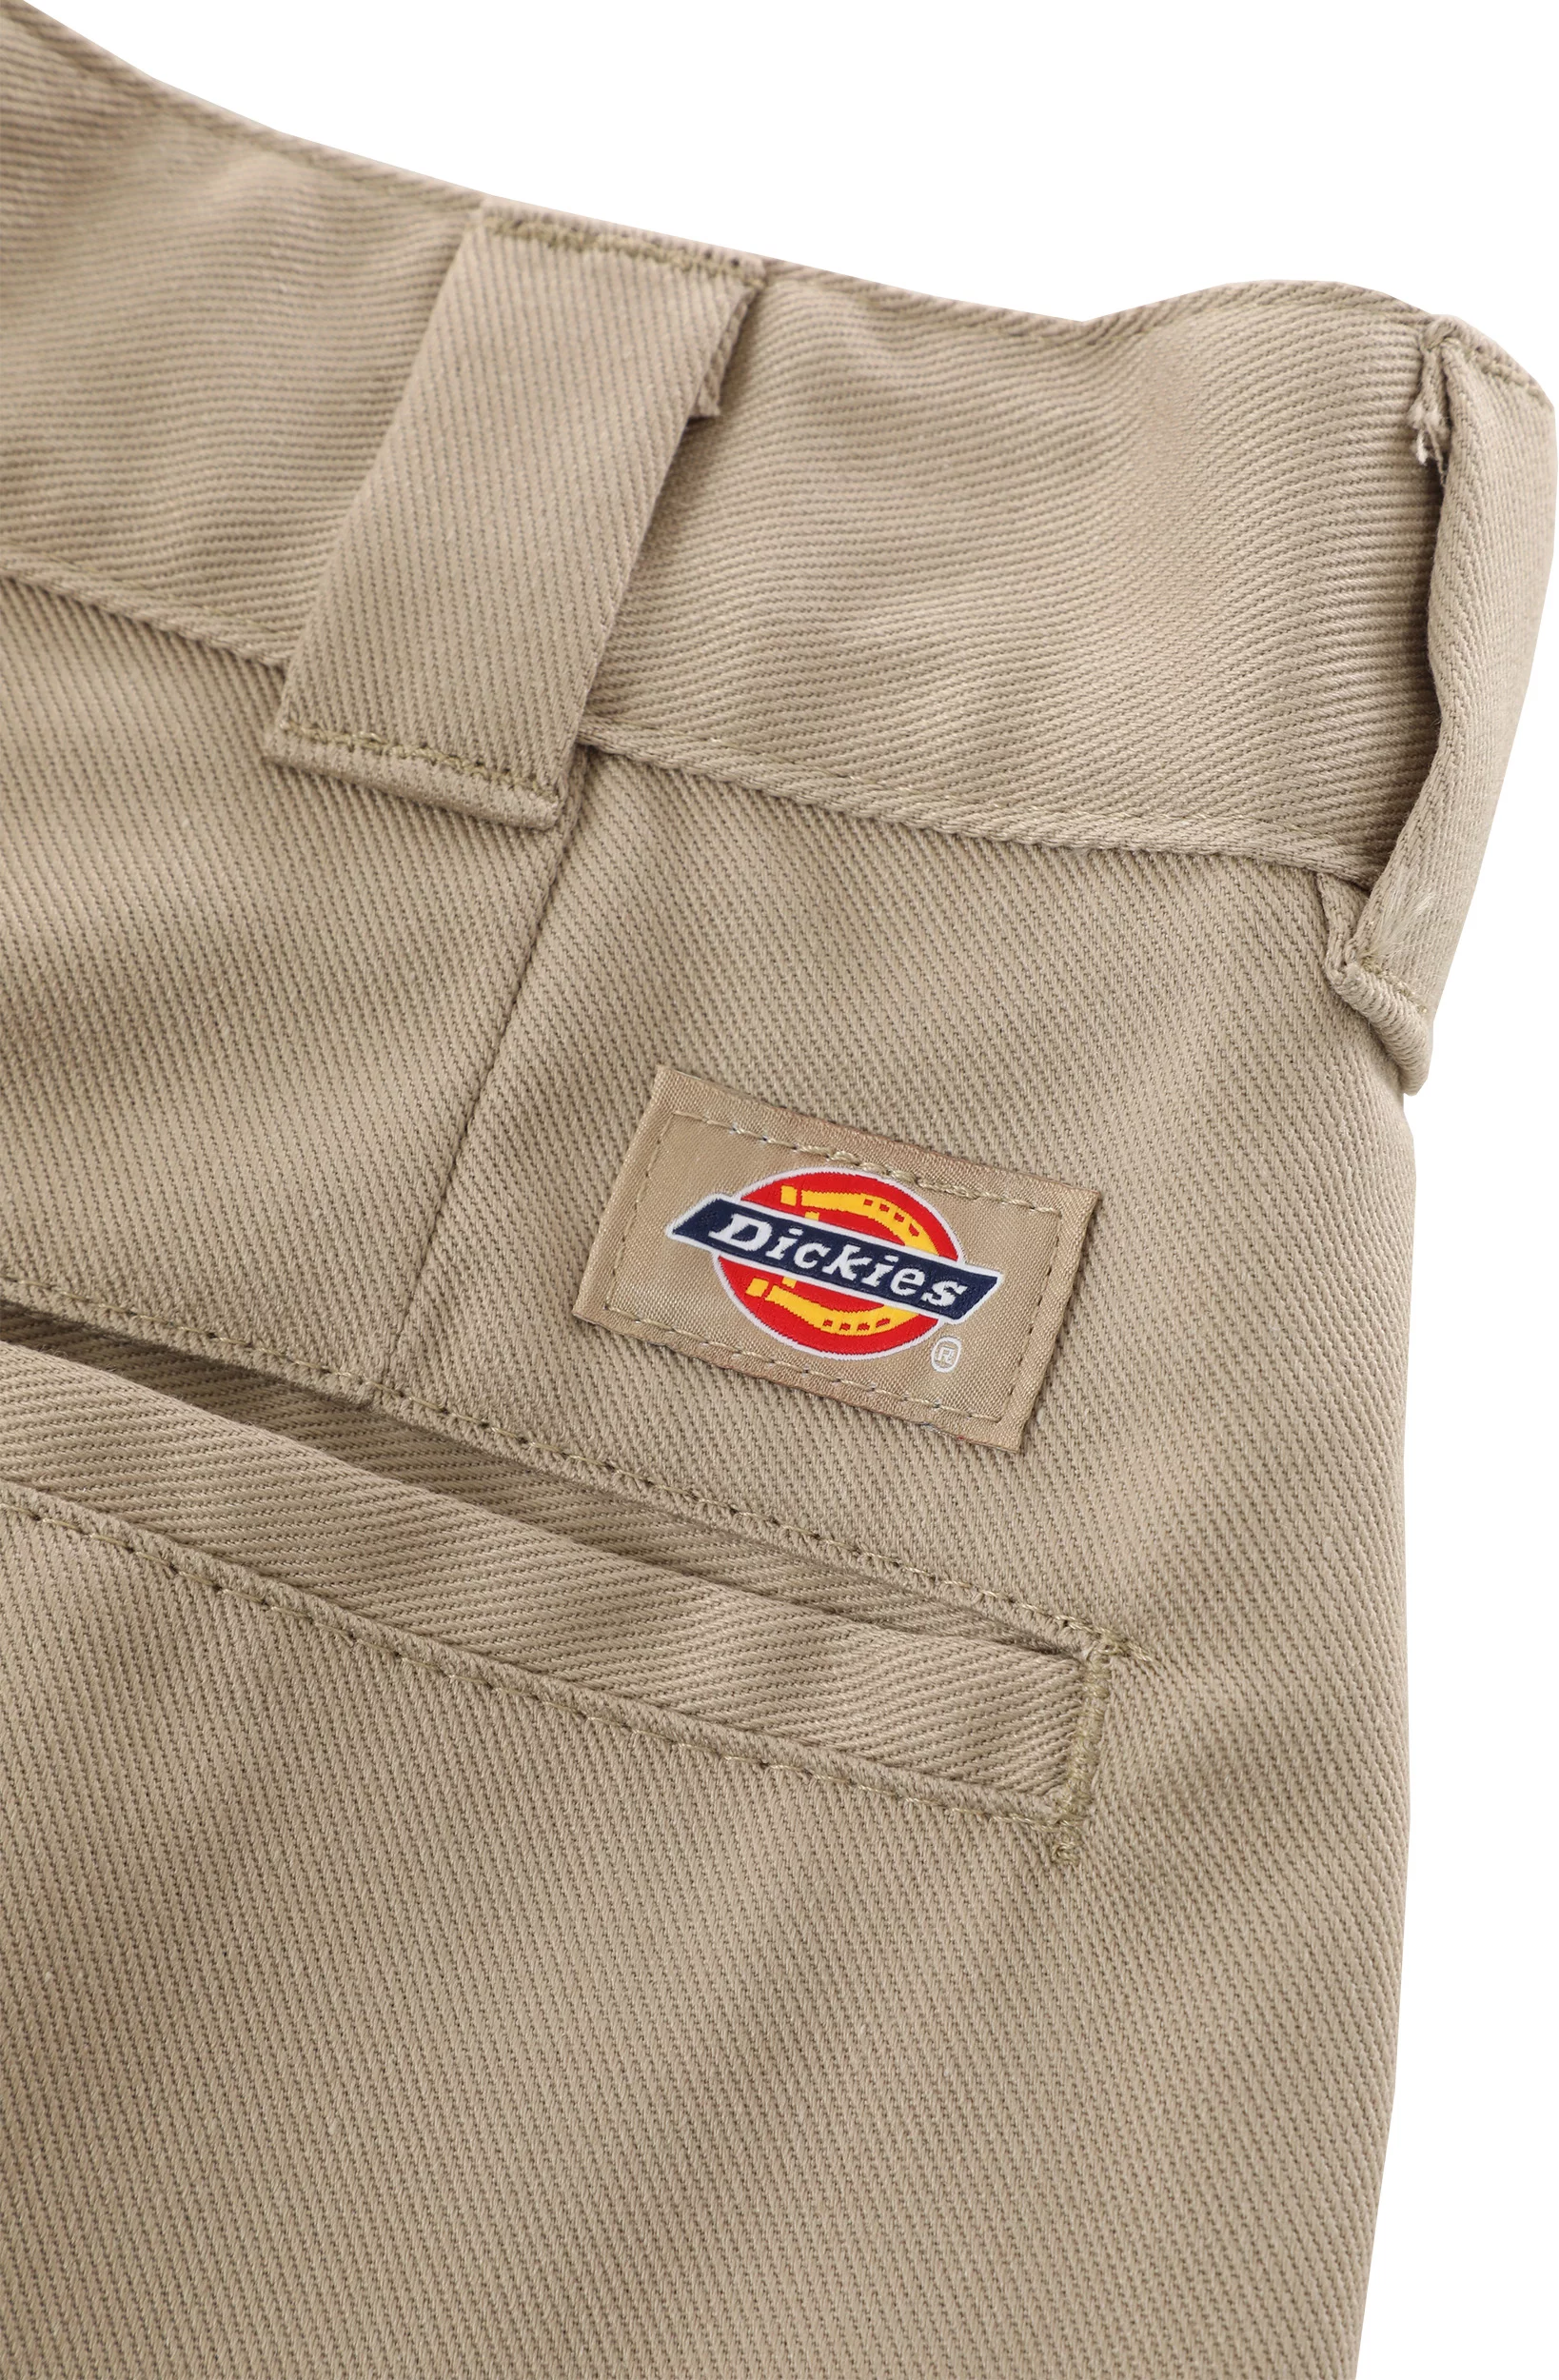 Dickies Orignal Fit 874 Chino Pants NWOT New without tags 36x29 - Helia  Beer Co